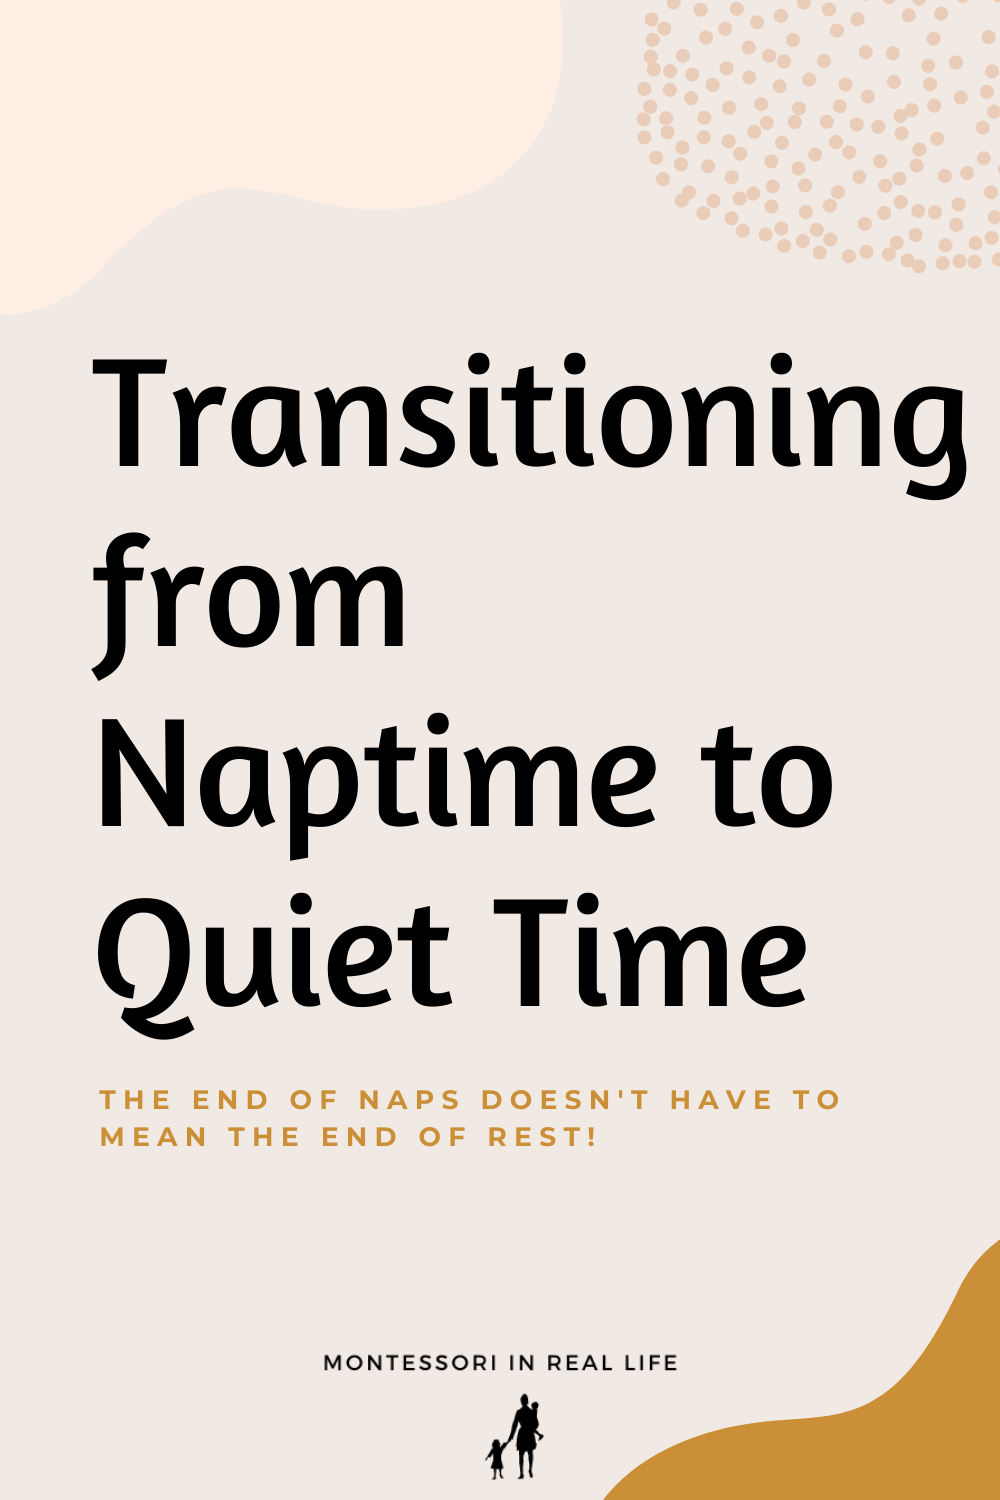 Transitioning from Naptime to Quiet Time